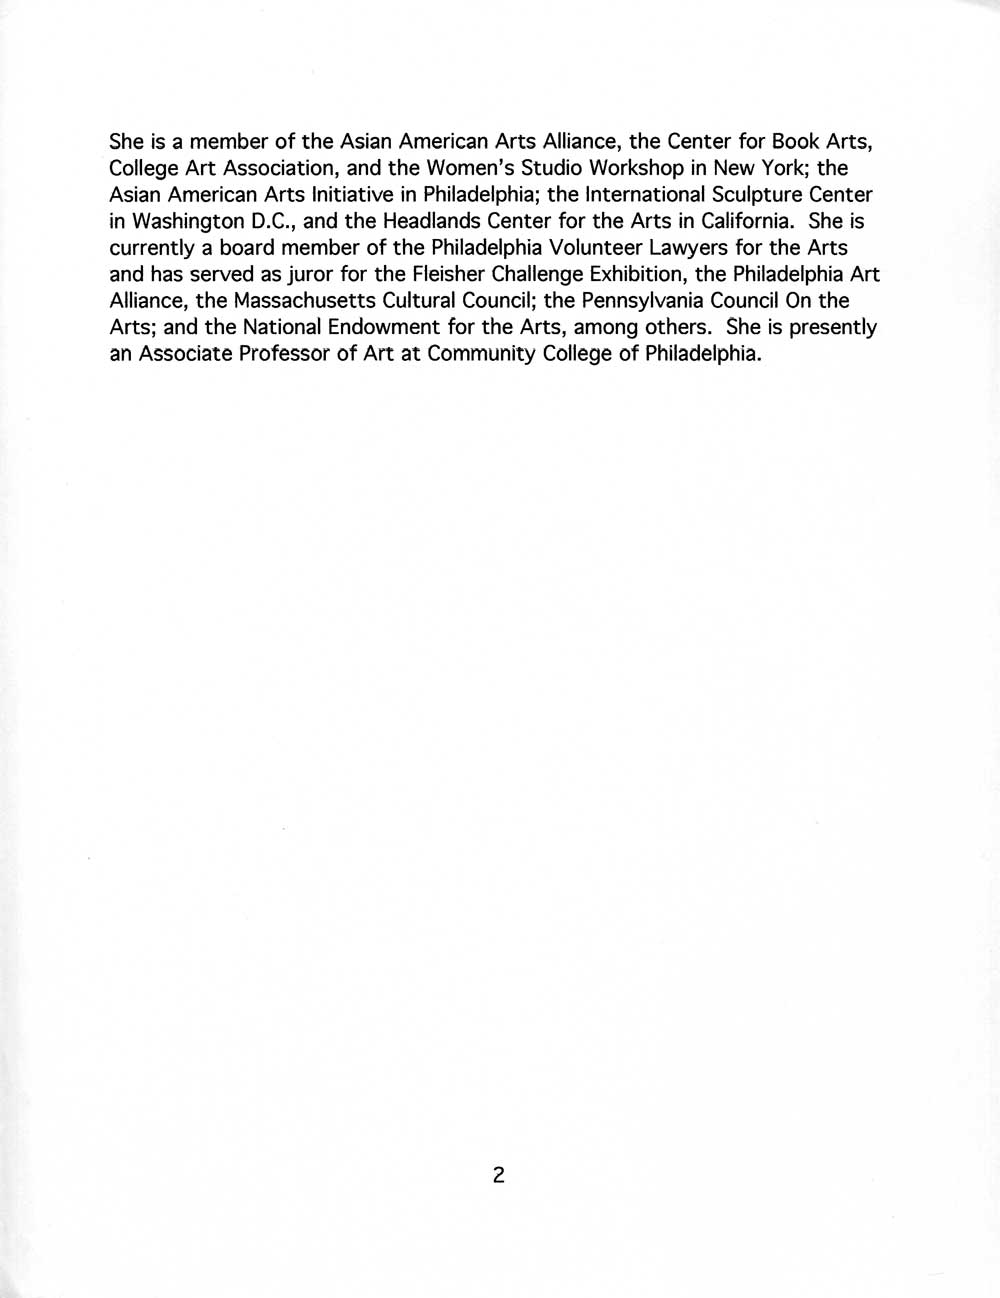 Mei-Ling Hom's Biography, pg 2